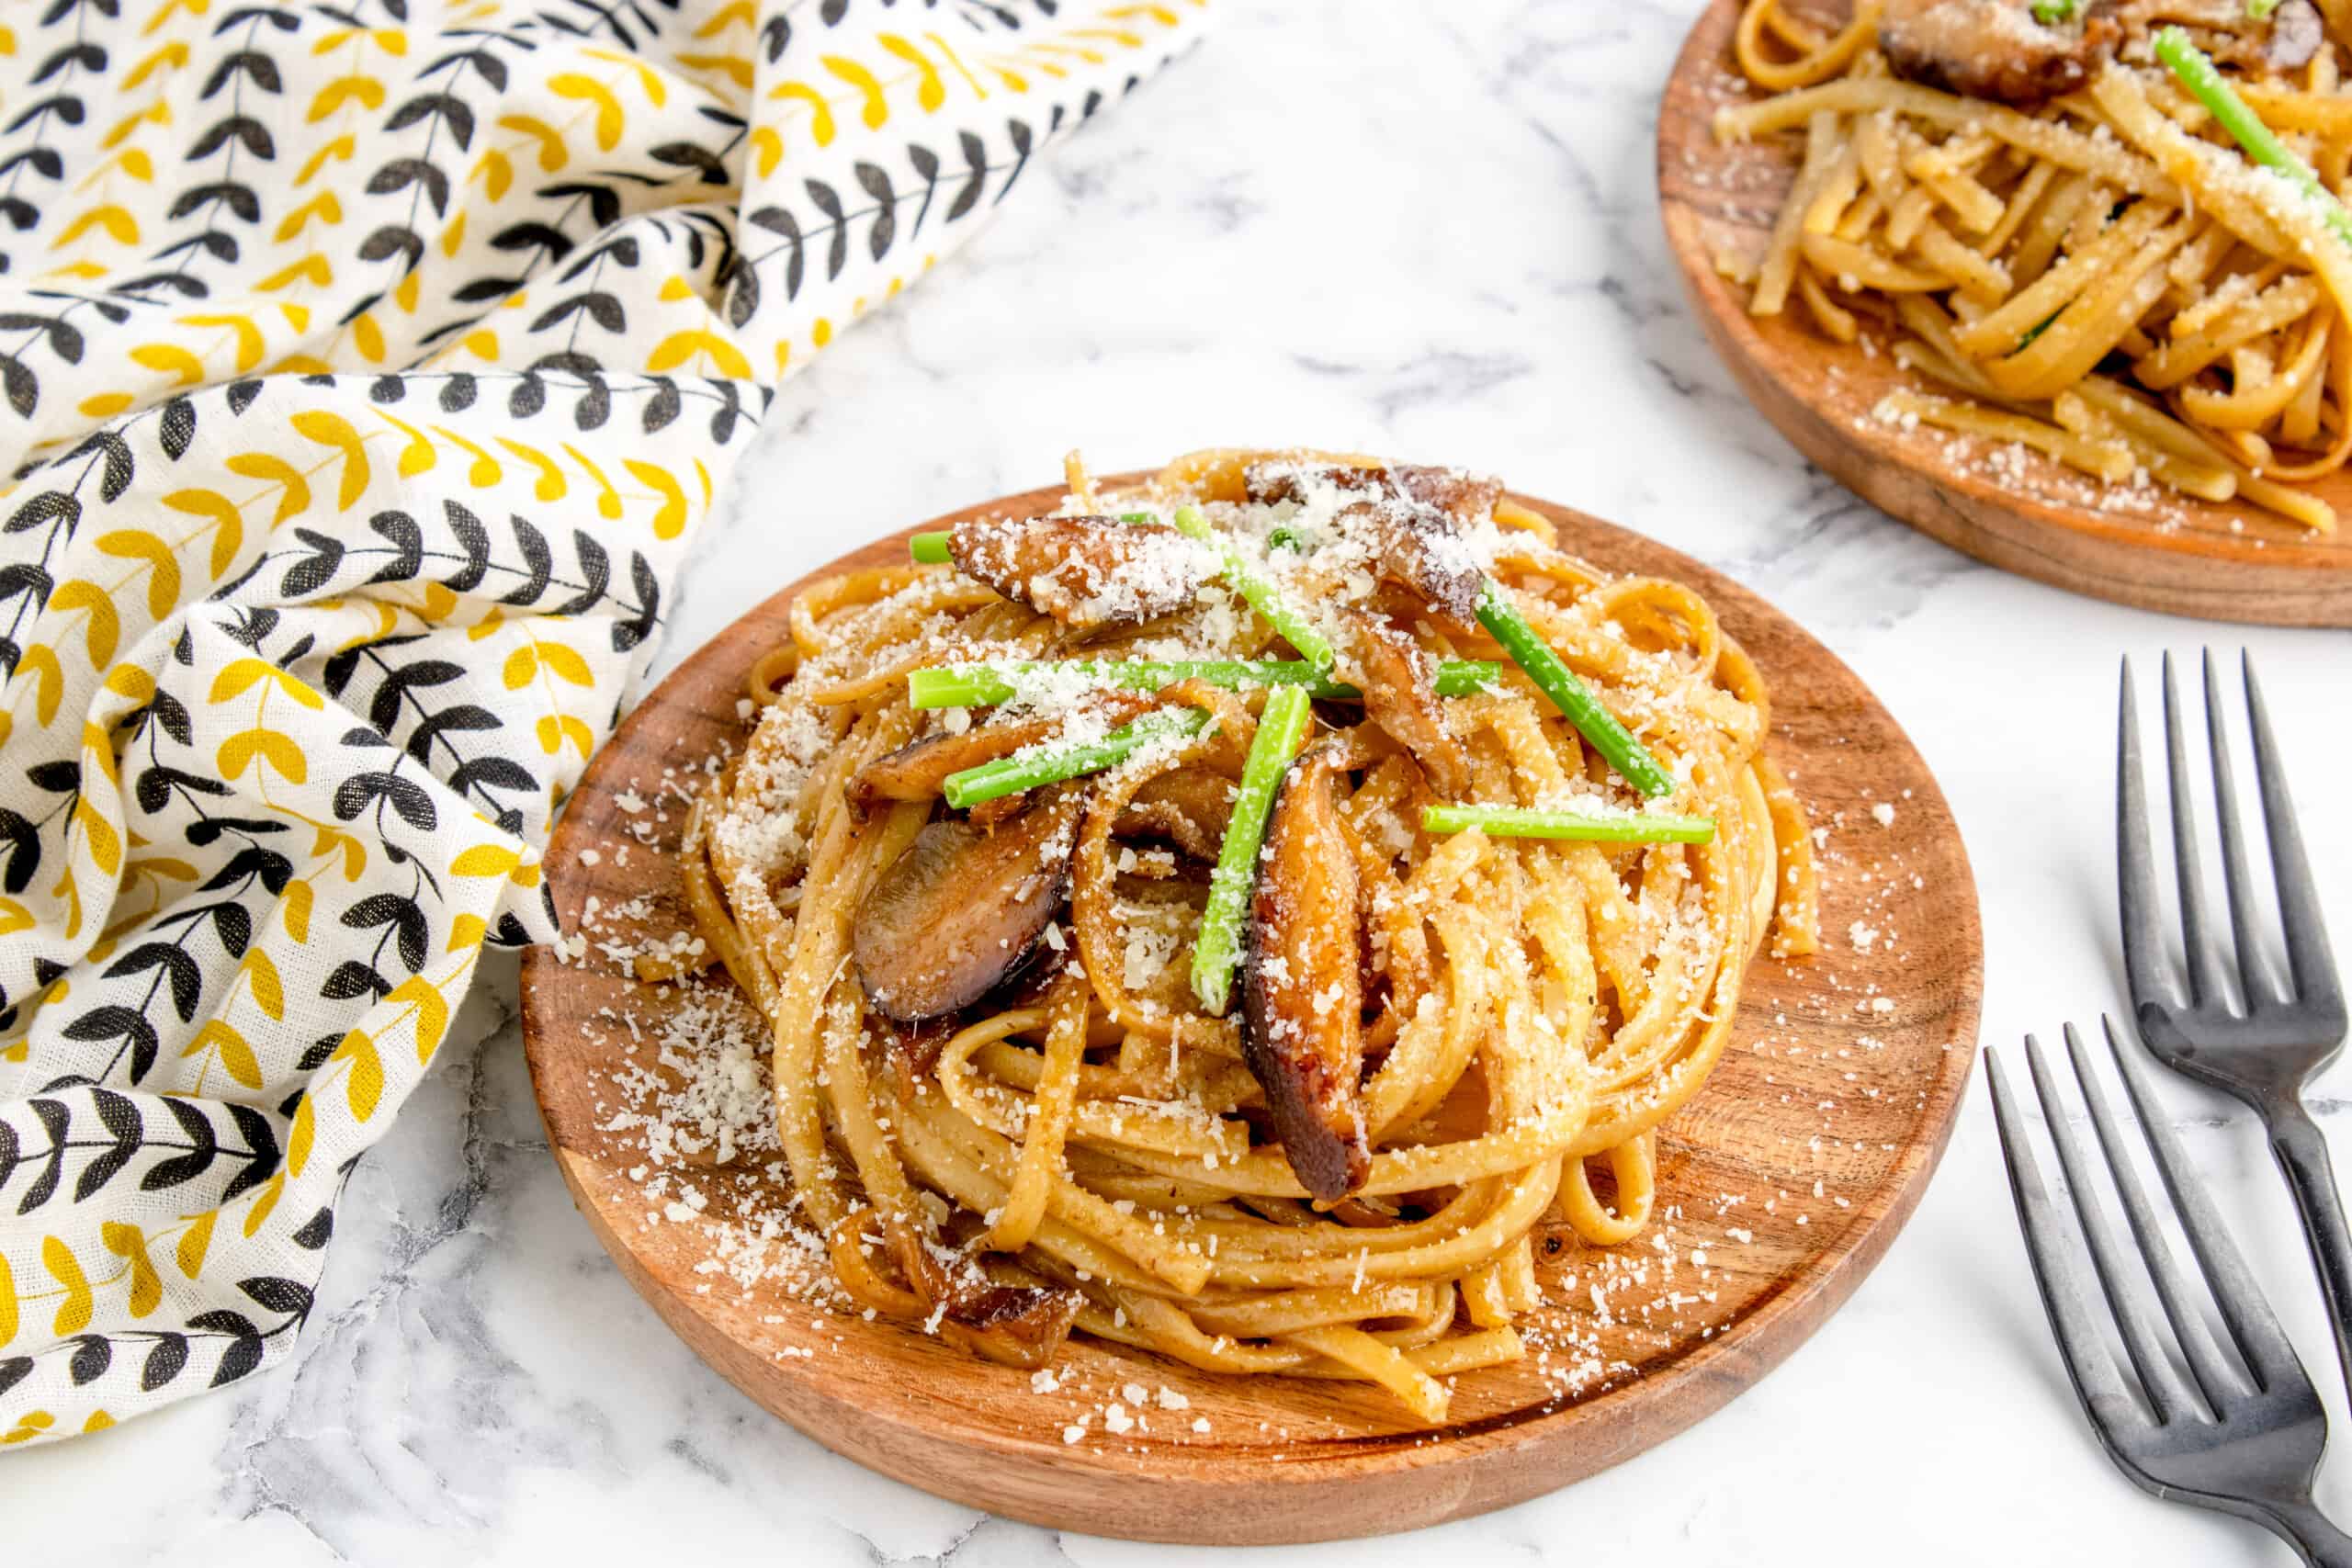 shiitake garlic noodles served on wooden plates topped with chives and grated parmesan cheese